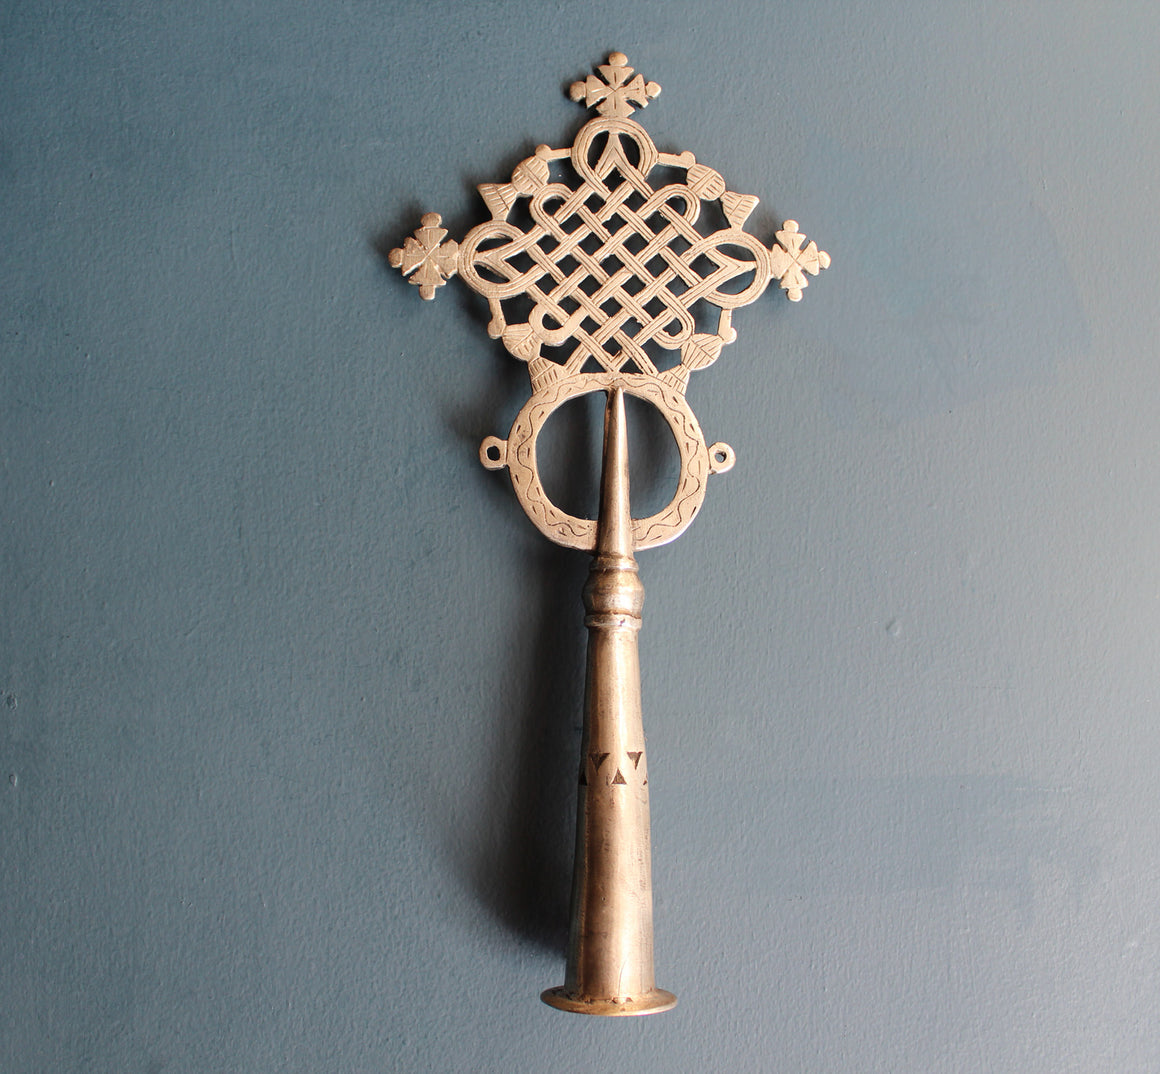 Decorative Processional Cross from Ethiopia - Small